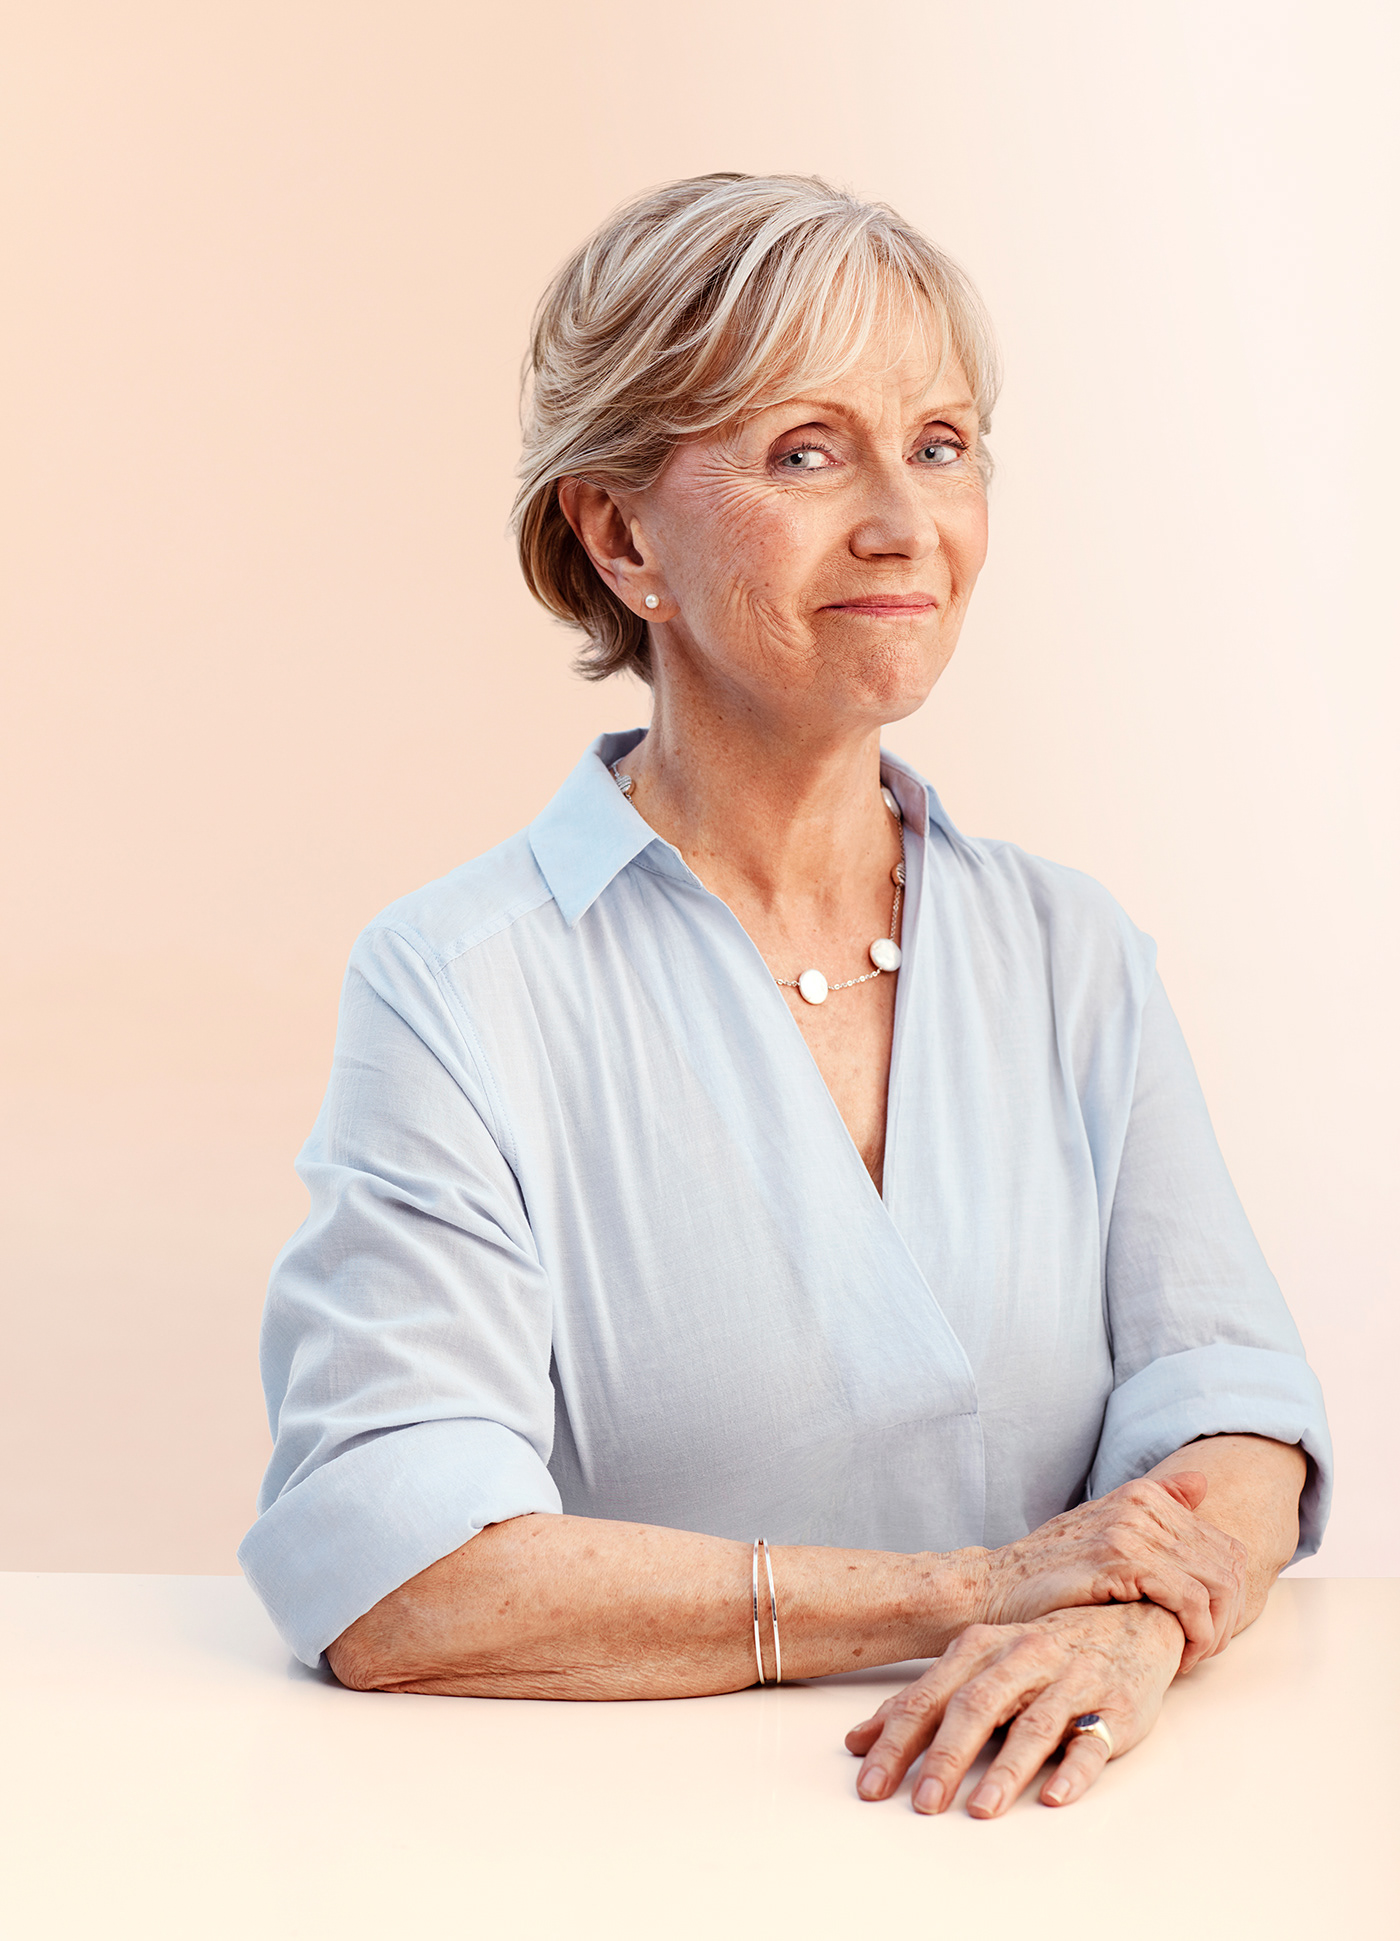 Smiling older woman with short blond hair, wearing light blue collared shirt. Arms folded on table. 